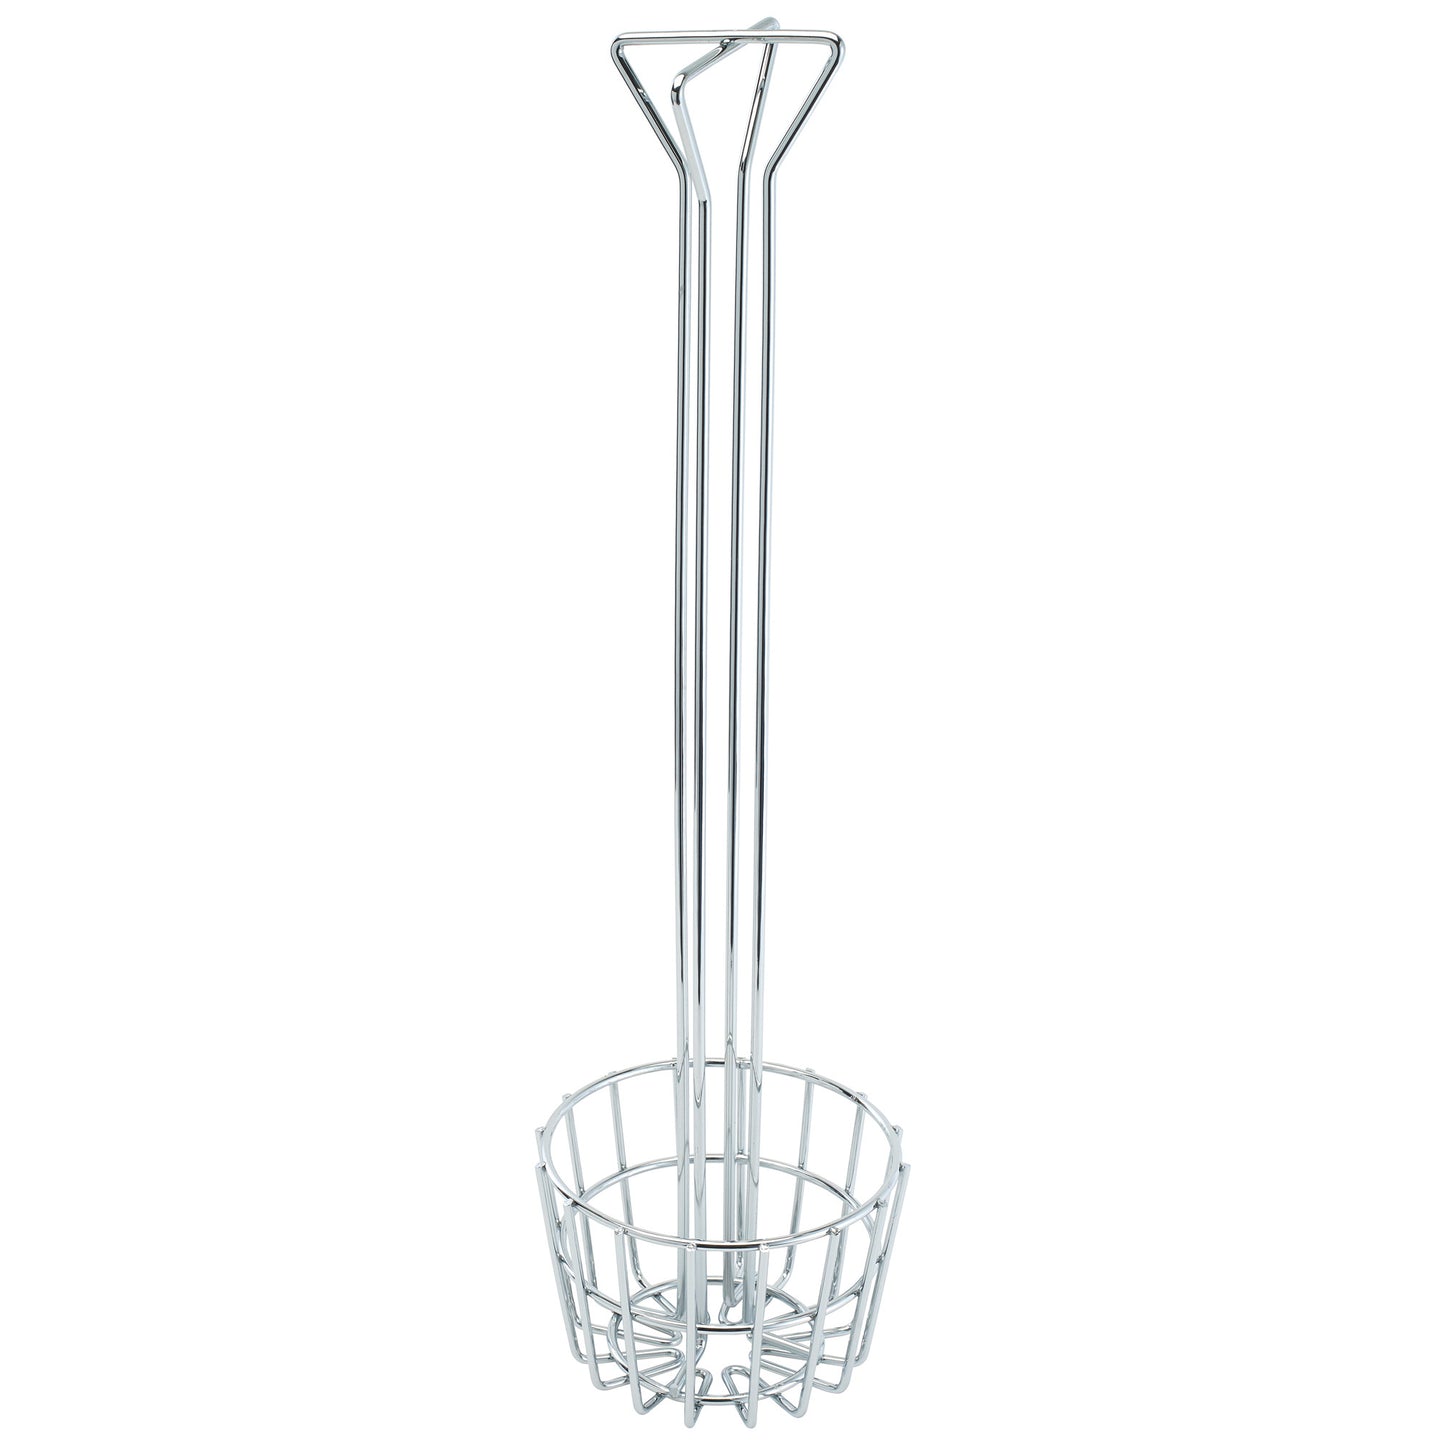 TB-25 - Fry Basket - Tortilla Shell - 6-1/4" Dia with 25" Handle